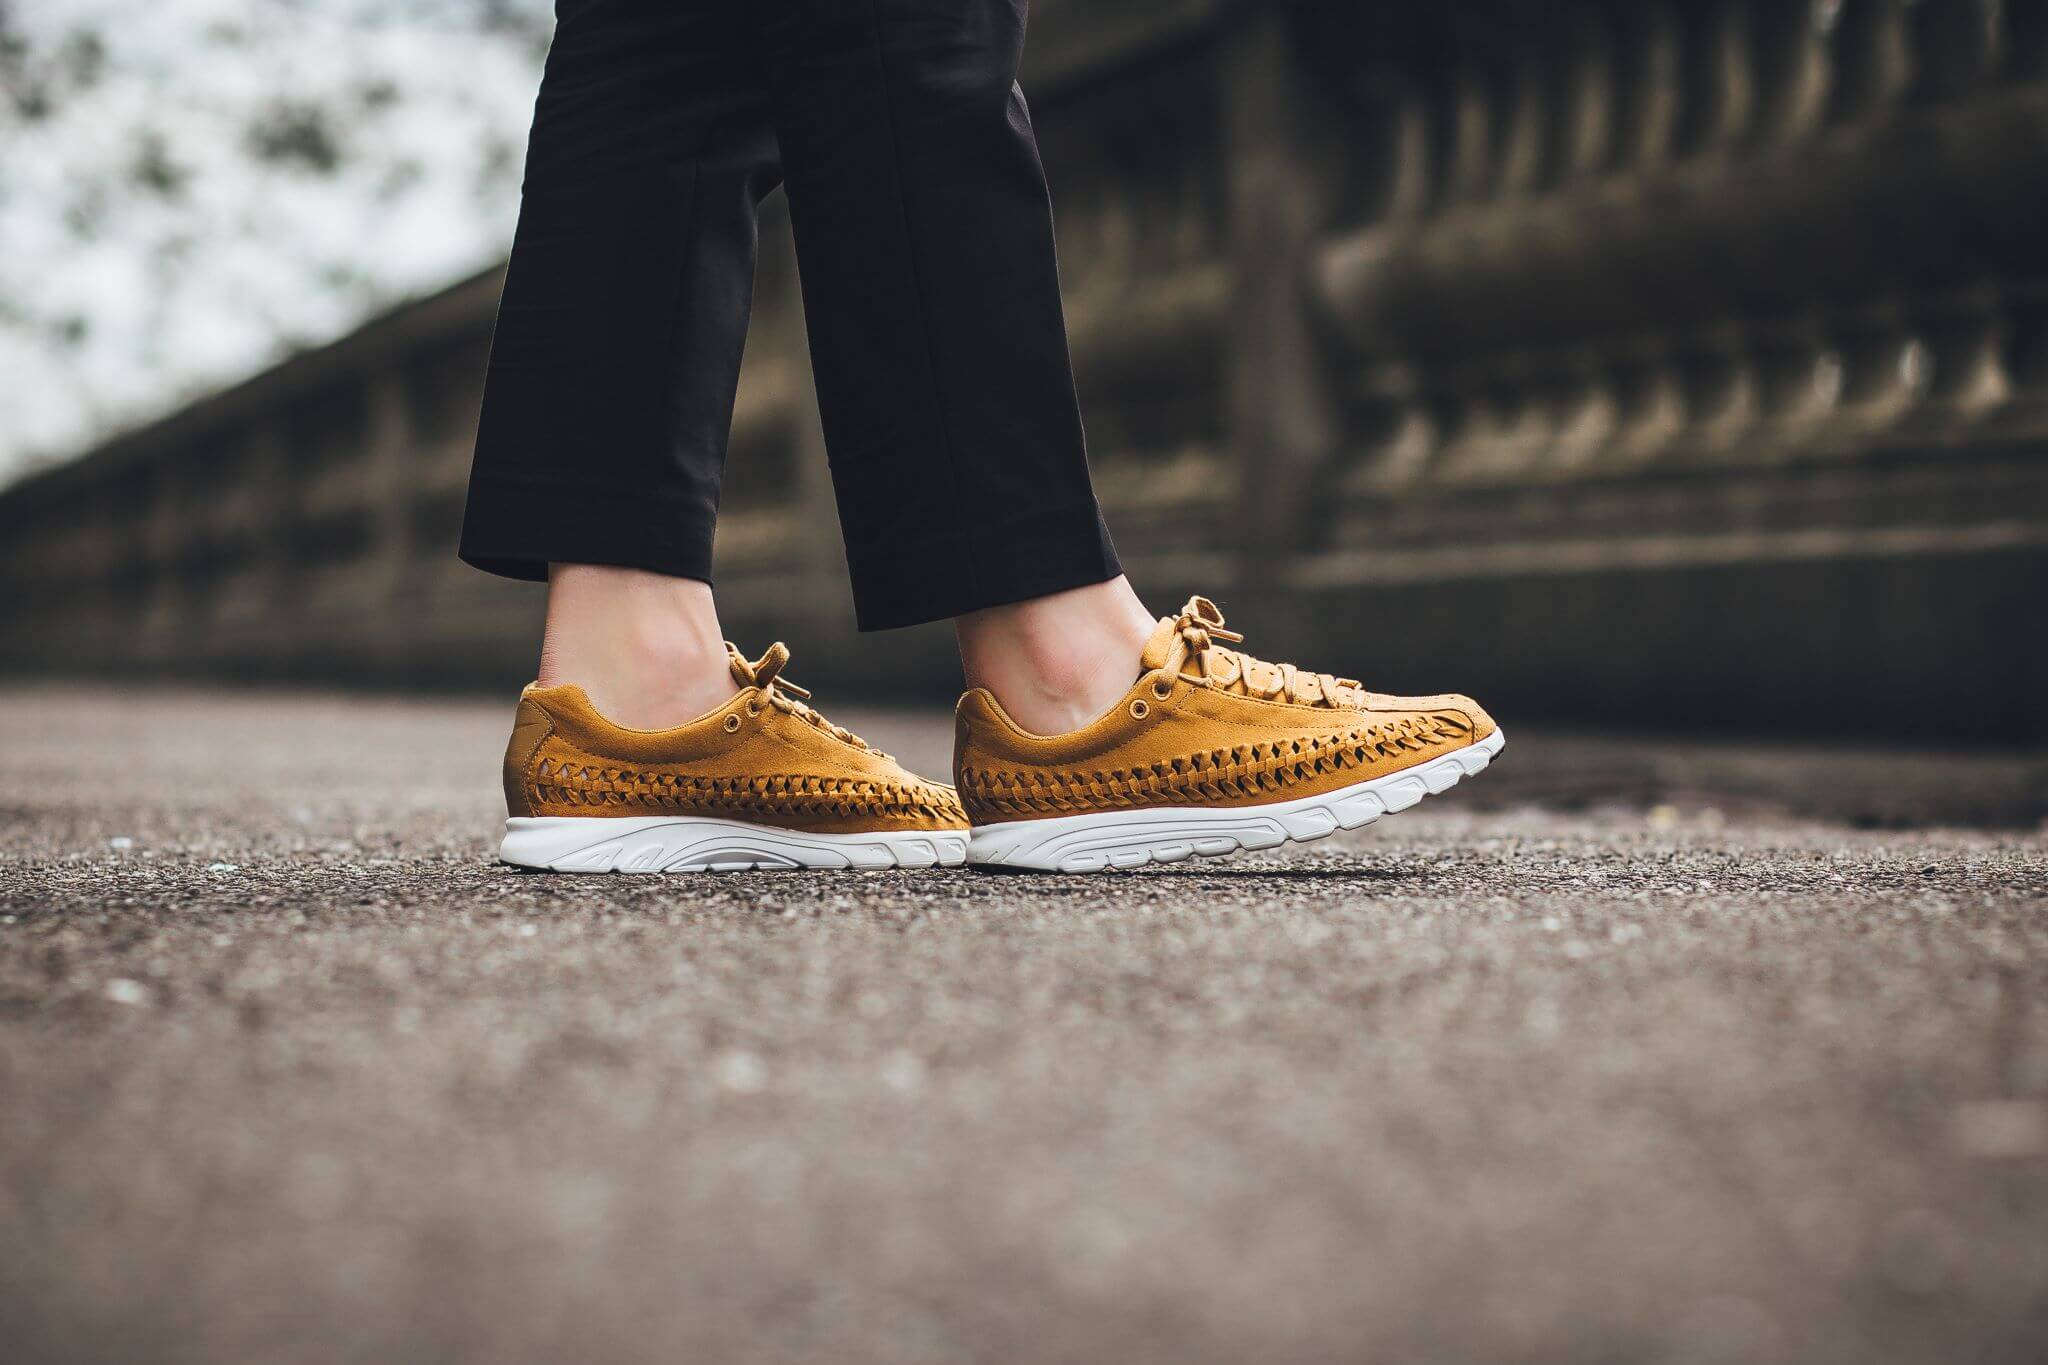 Nike Mayfly Woven Bronze | Where To | The Sole Supplier